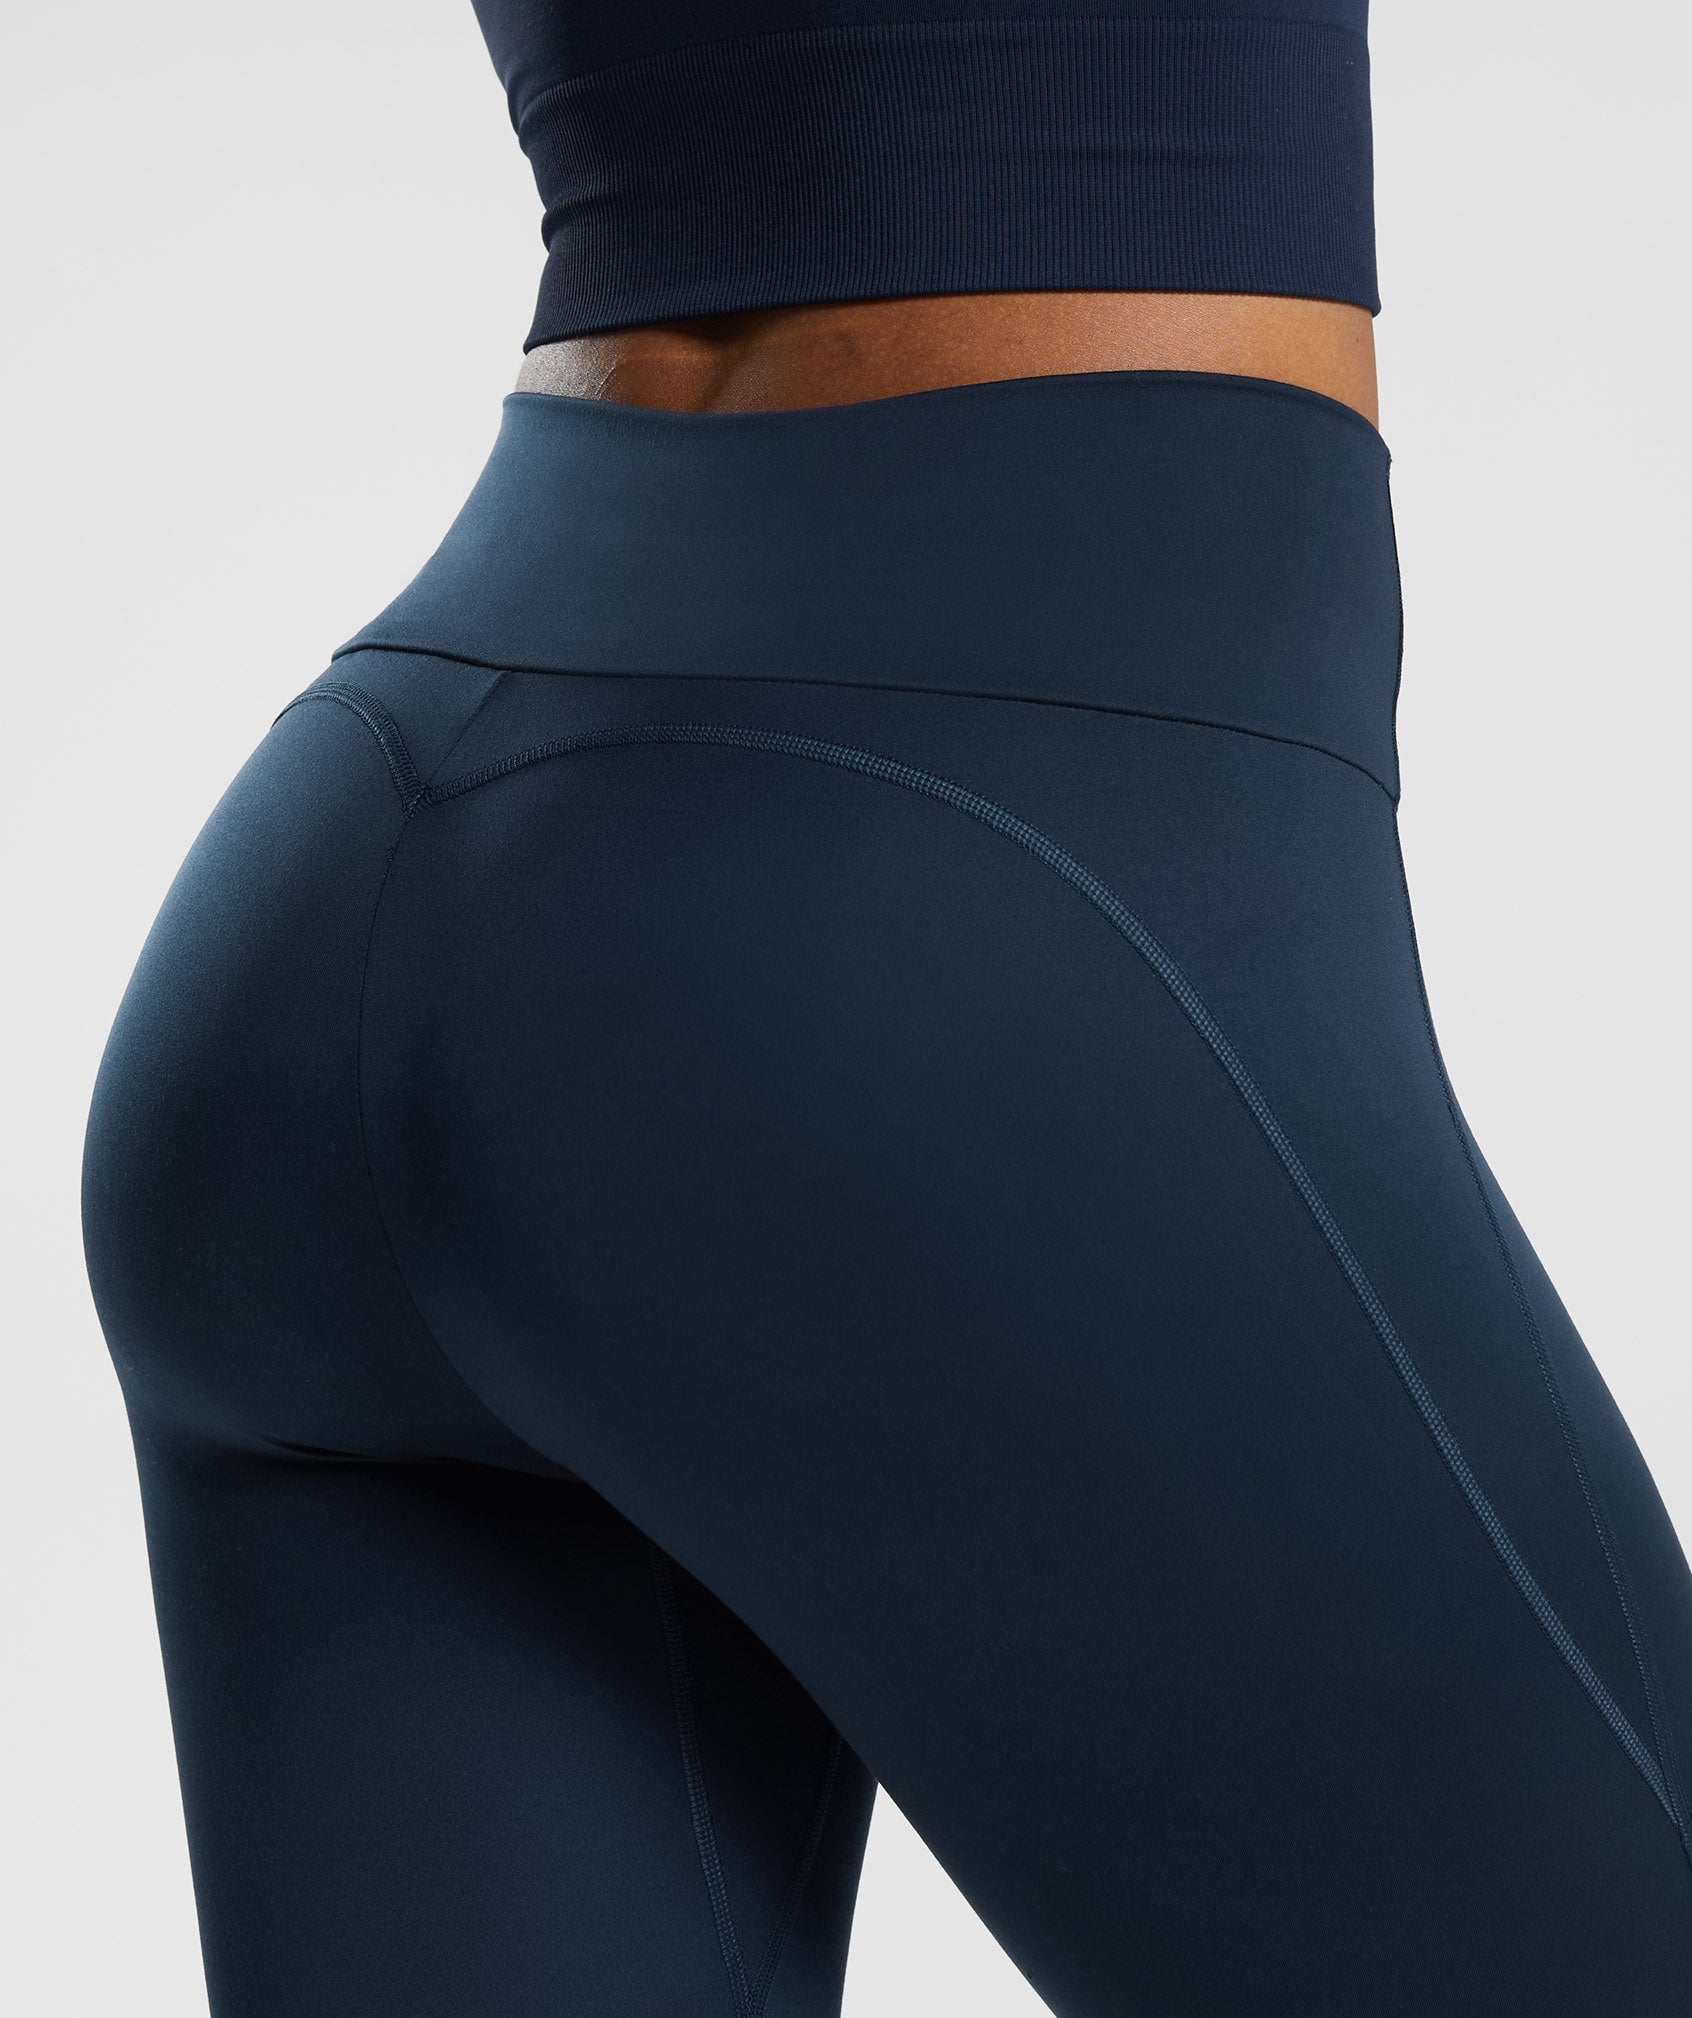 Everyday Contour Leggings in Navy - view 4